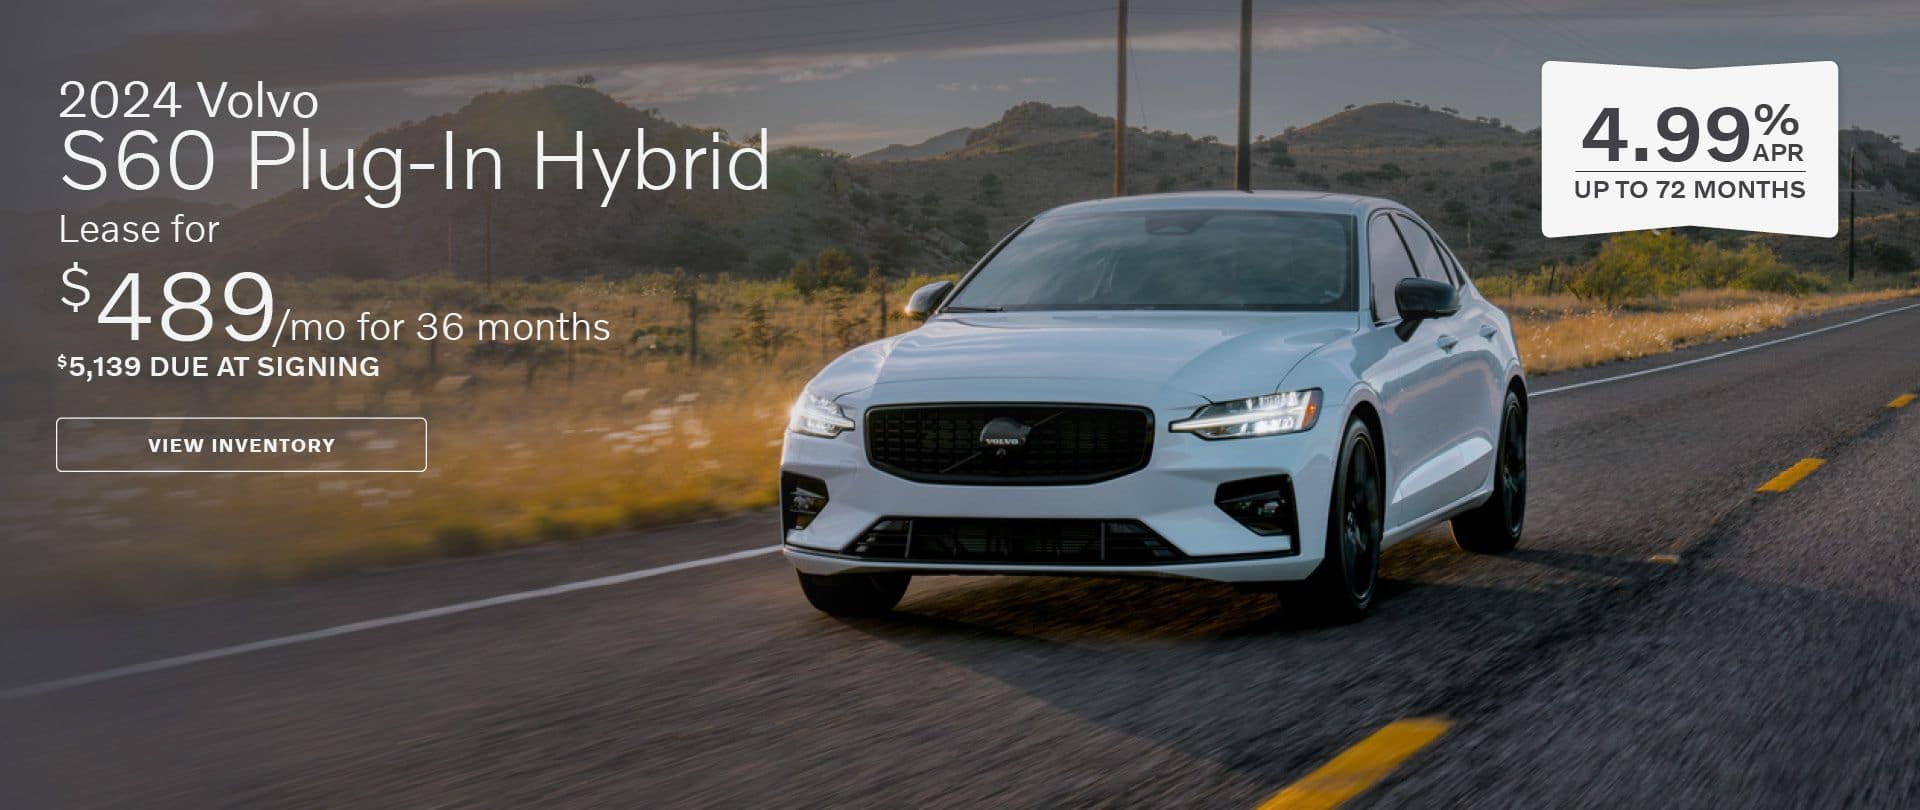 Southern_ROR-Apr24-2024 Volvo S60 Plug-In Hybrid | Lease for $489:mo_1920x810